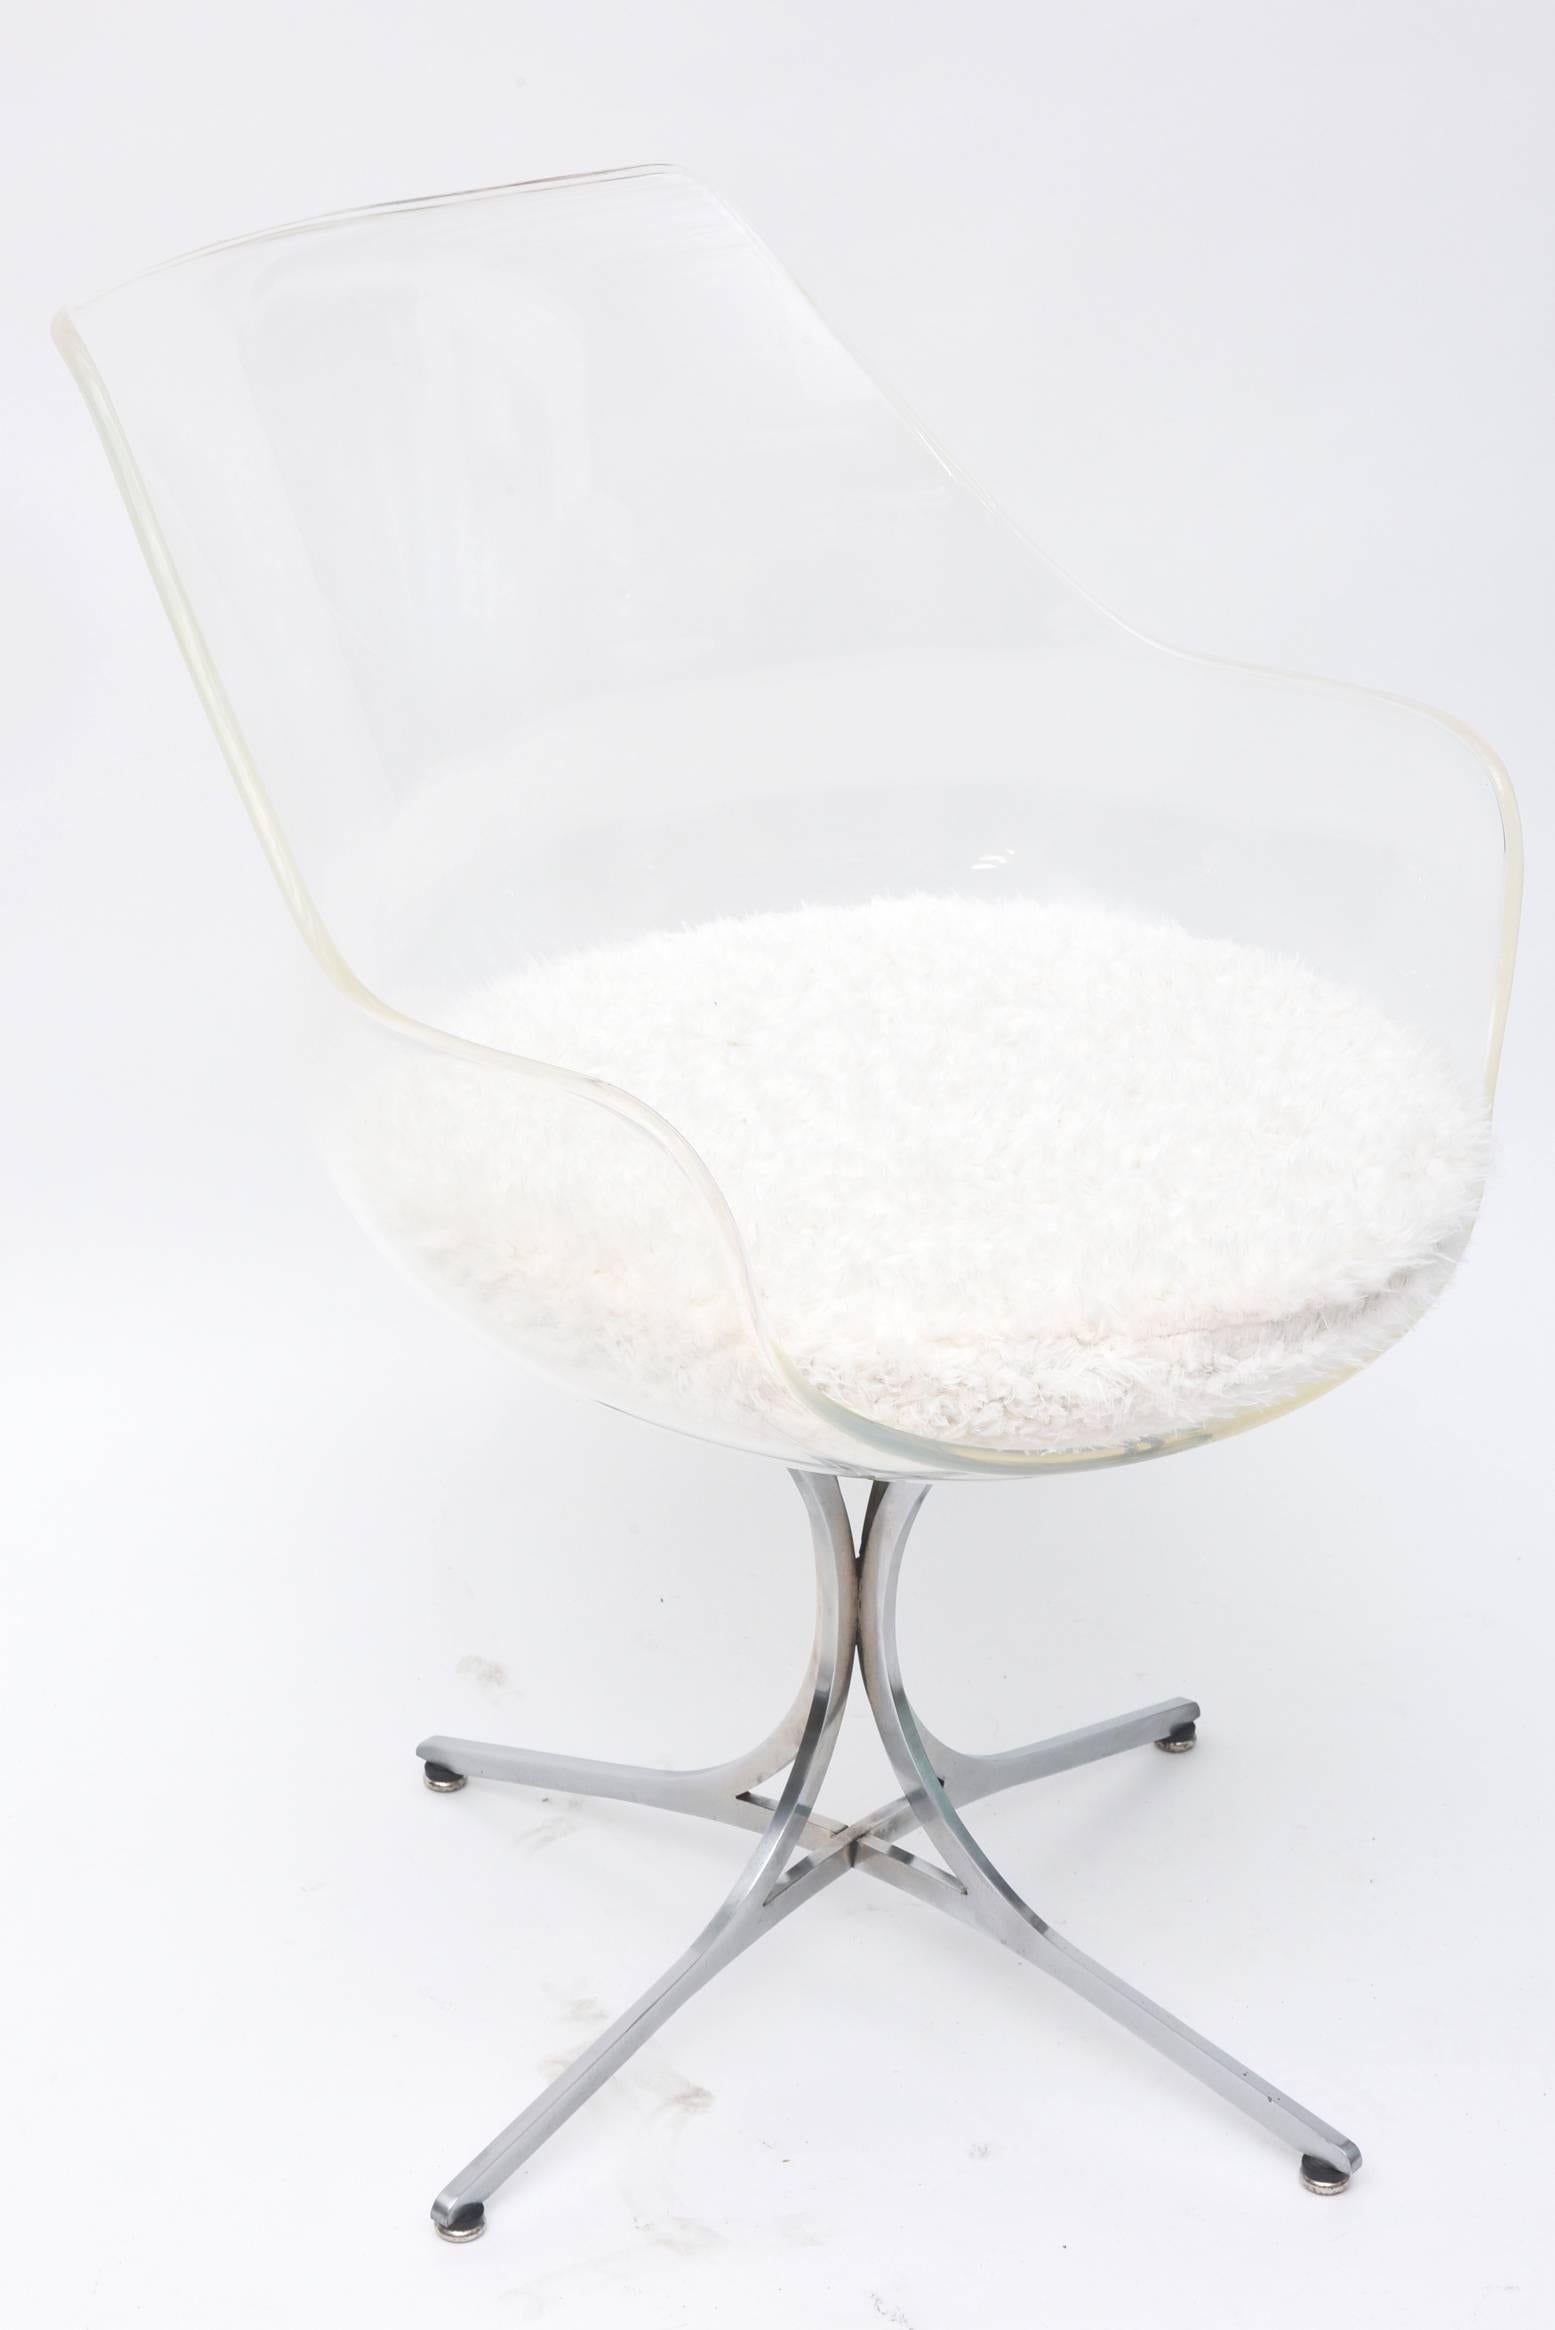 American Laverne Champagne Chairs on Custom Lotus Bases For Sale